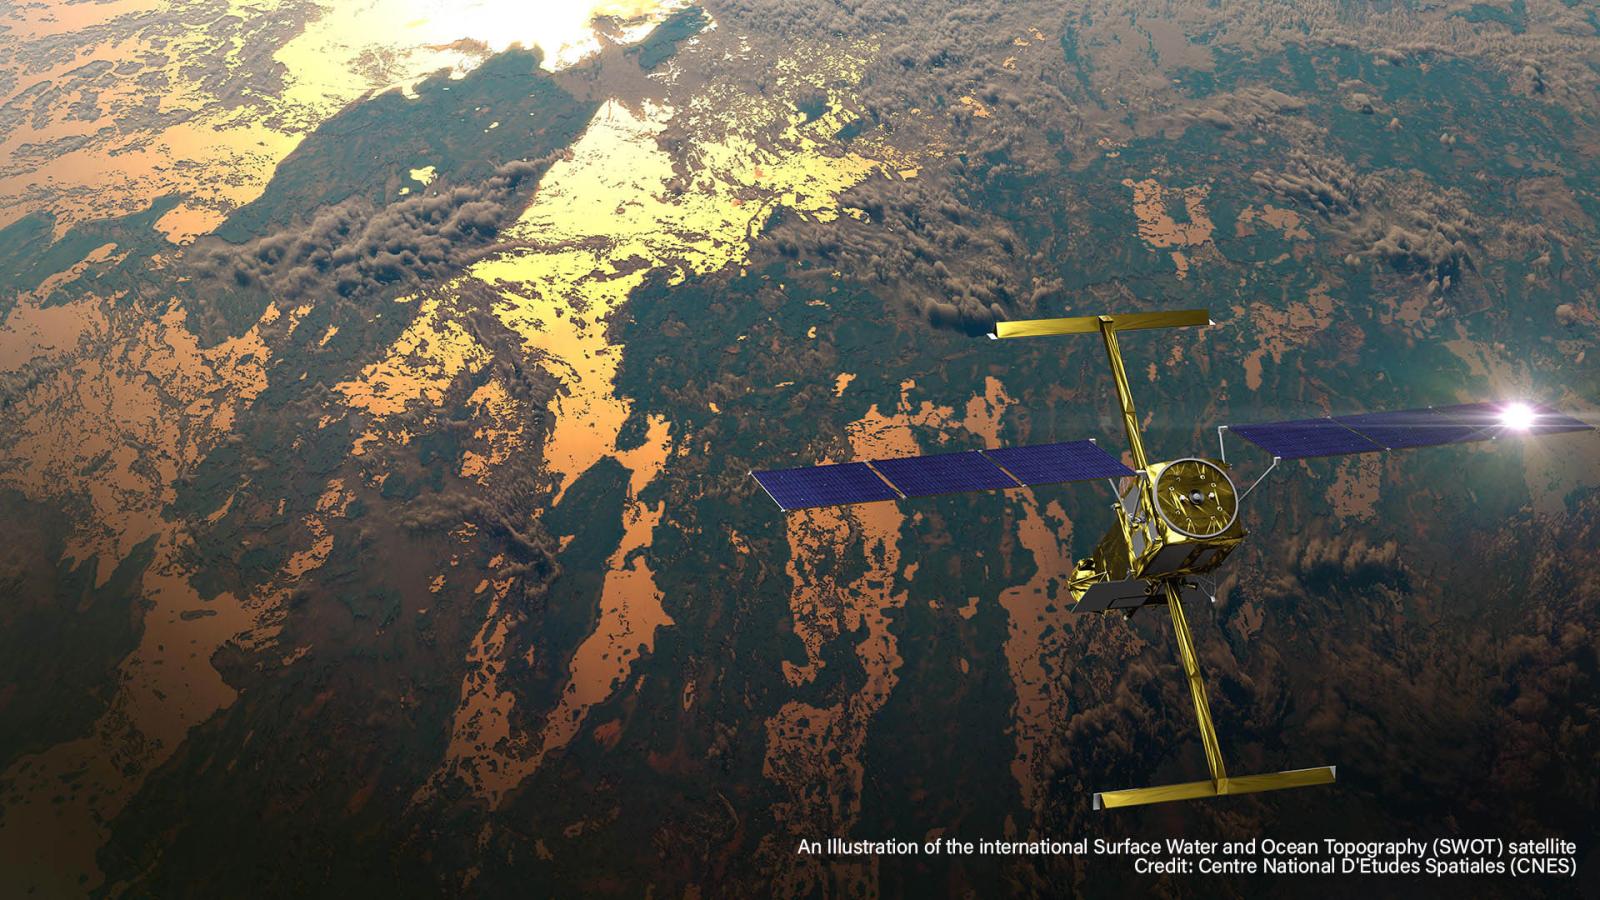 An illustration of CNES showing a gold SWOT satellite in orbit above land of water and vegetation with sunlight glinting off the water and one array of solar panels, as well as both blue tile KaRIn instrument antennas deployed.